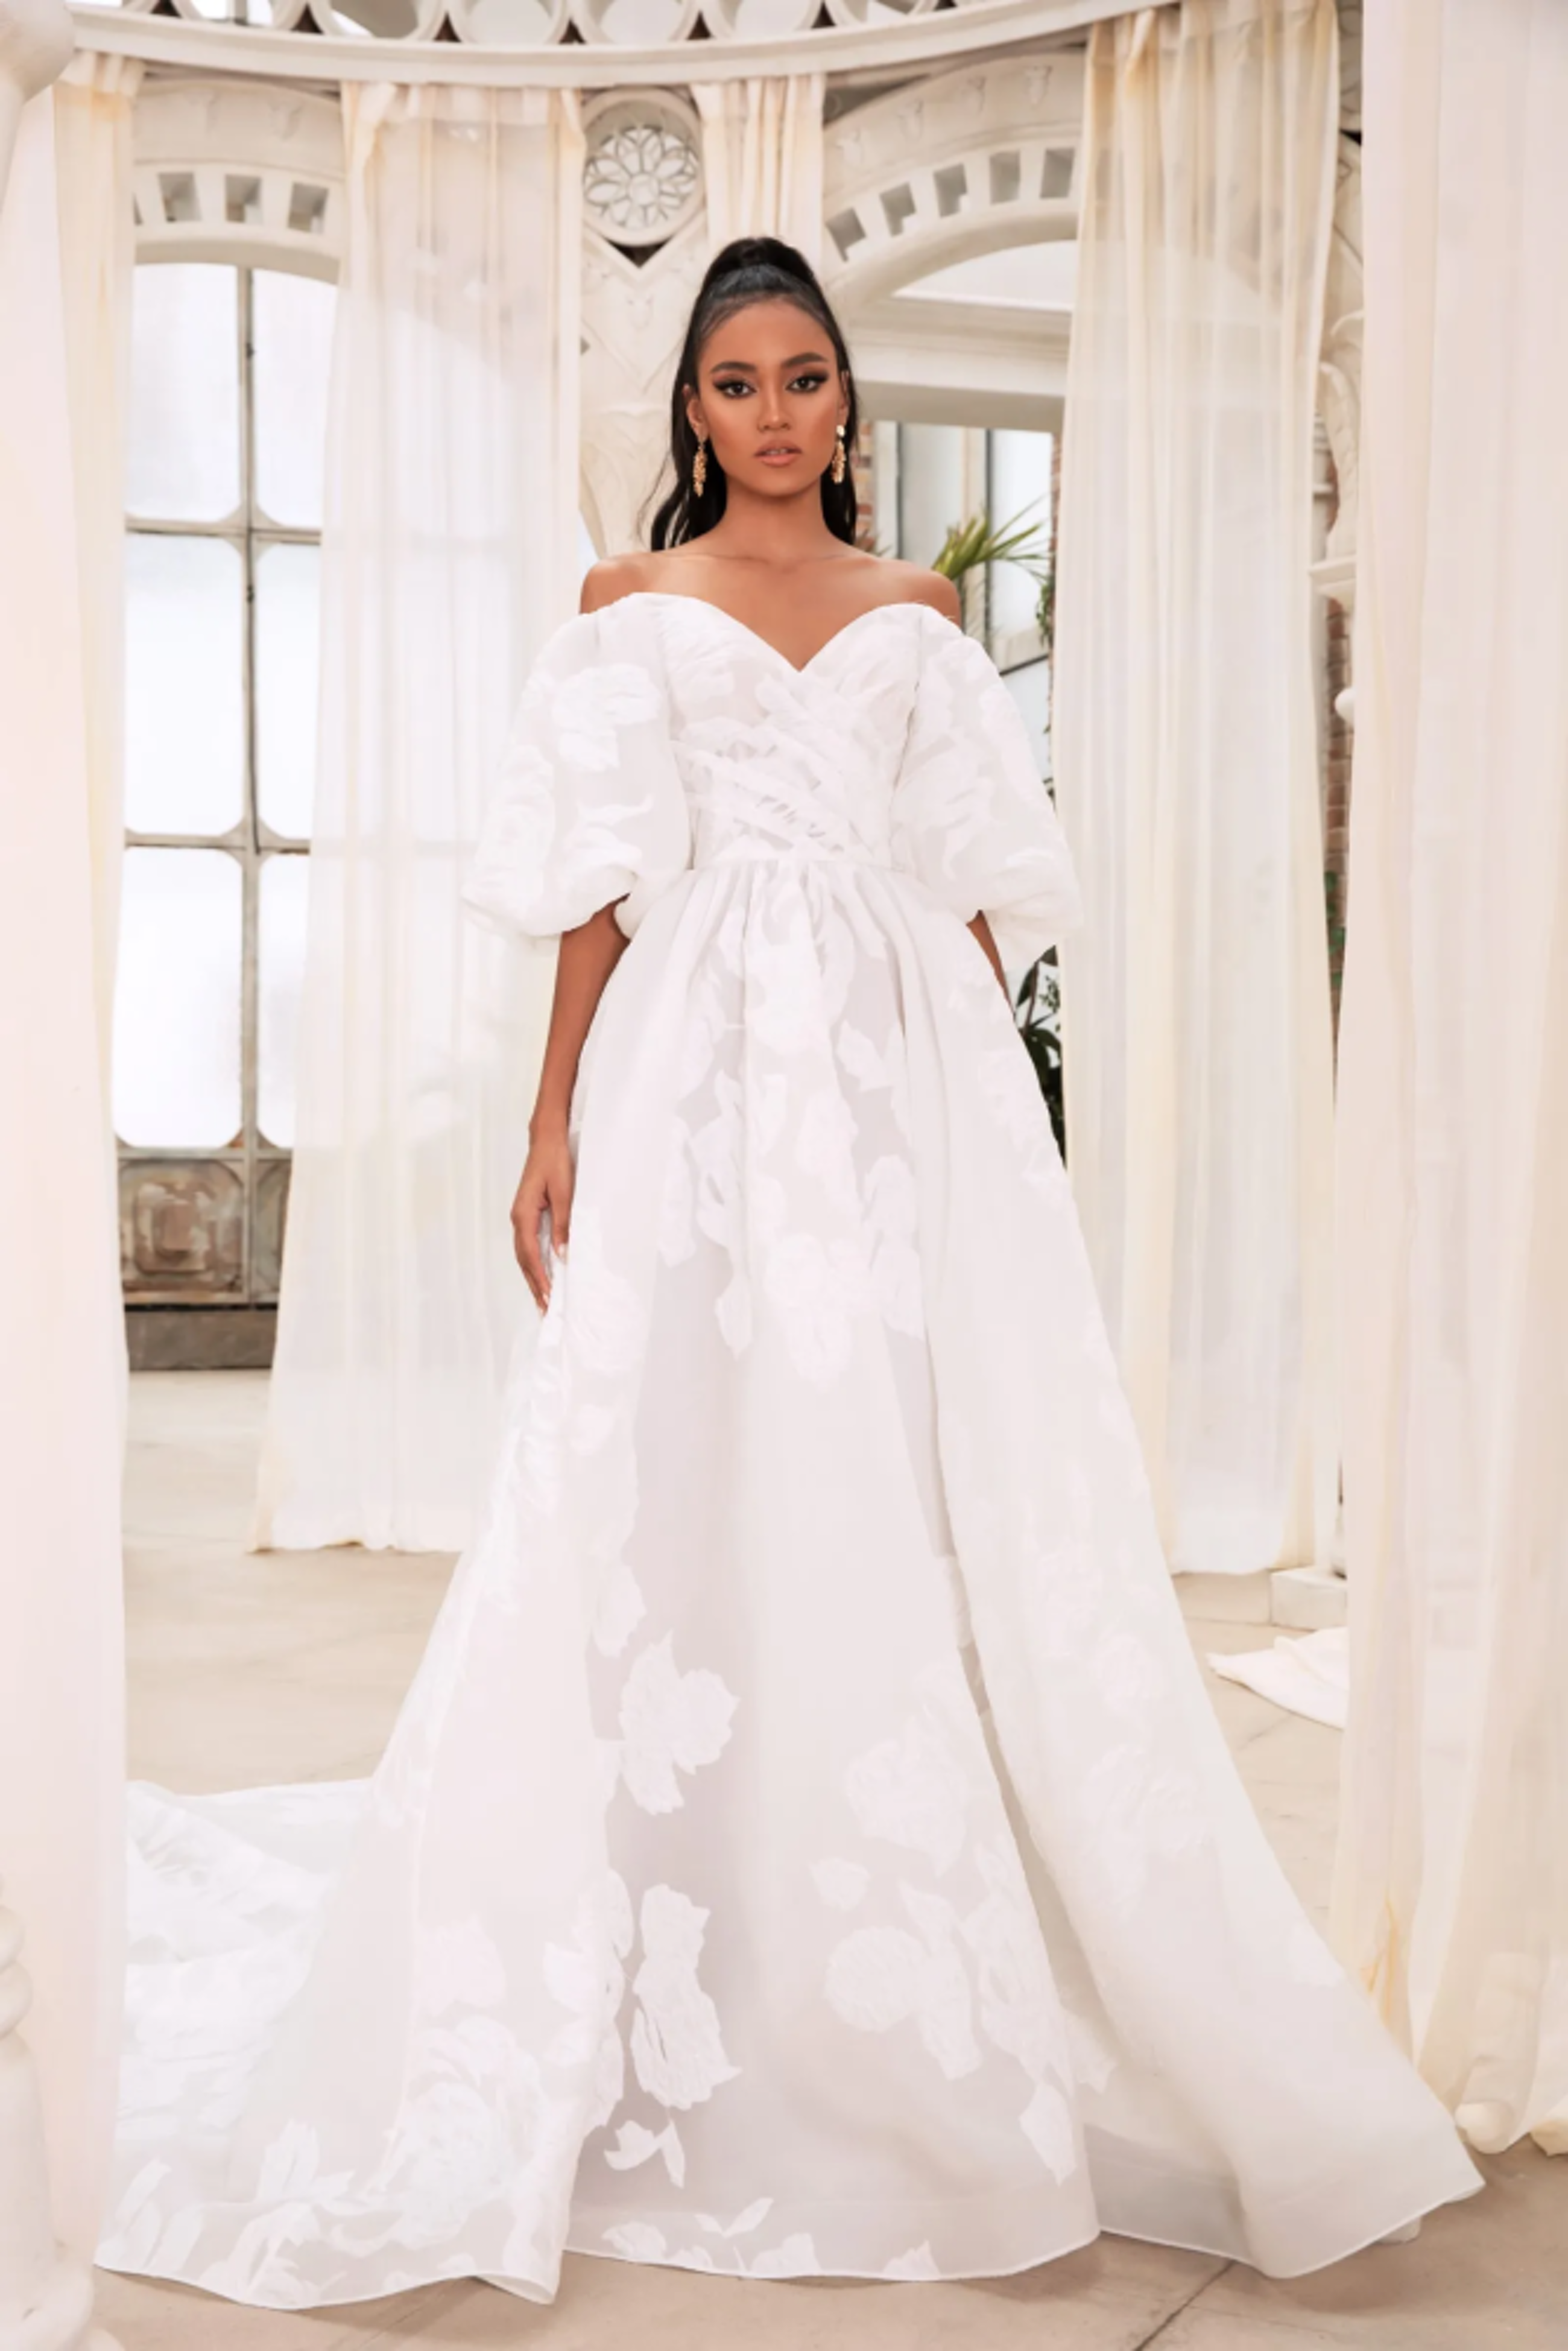 Bridal Gowns For Your Fall Wedding Image